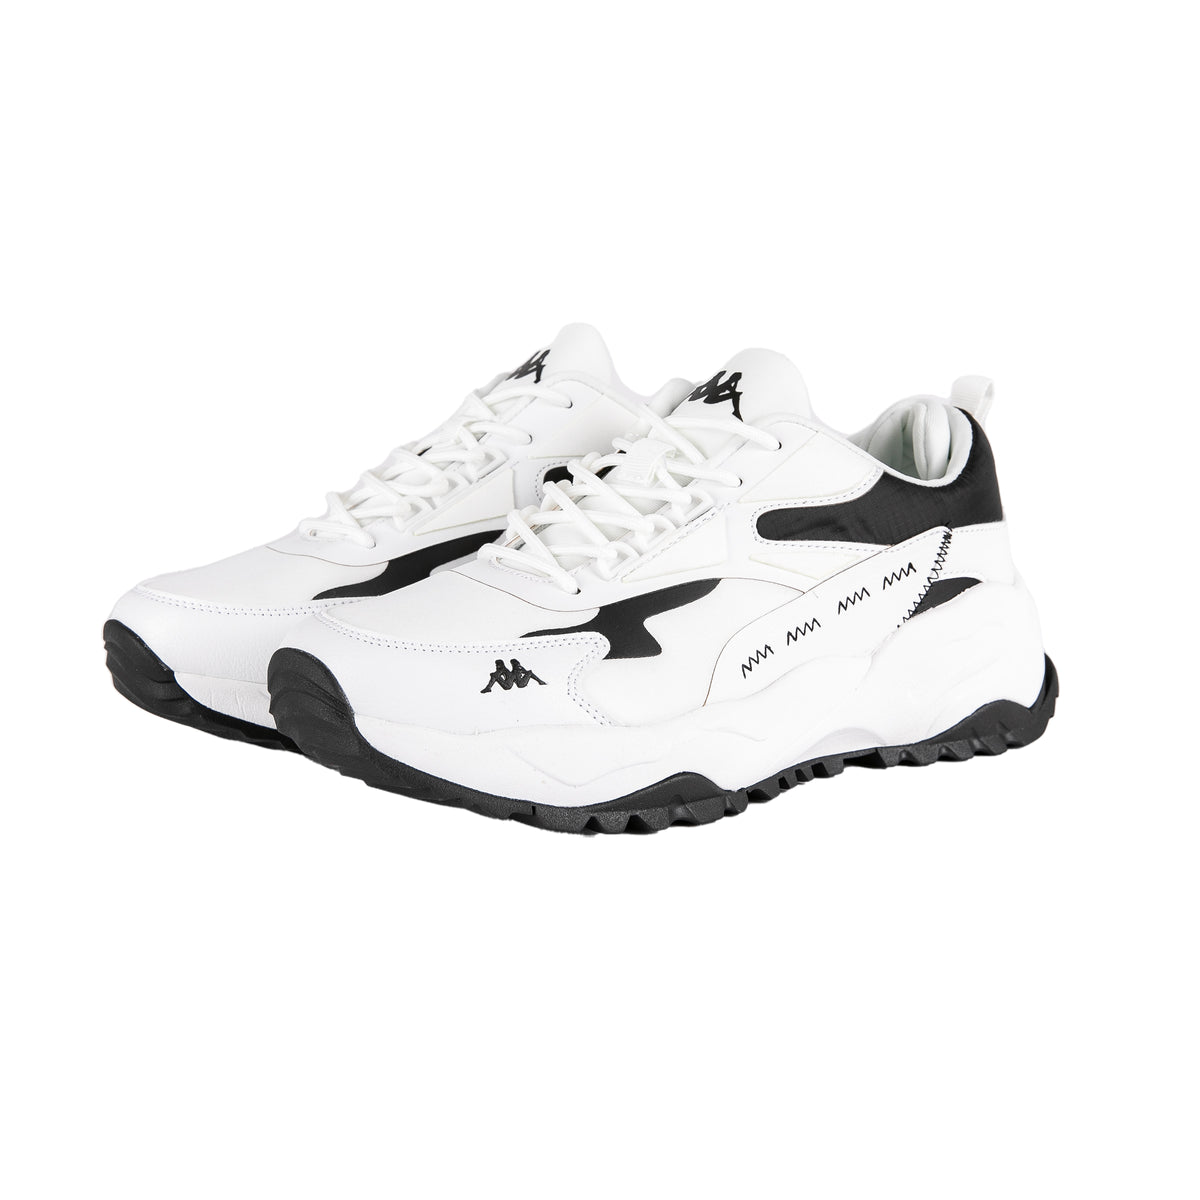 Shop online for Authentic Altin 3 Sneakers - White Black Kappa US | 